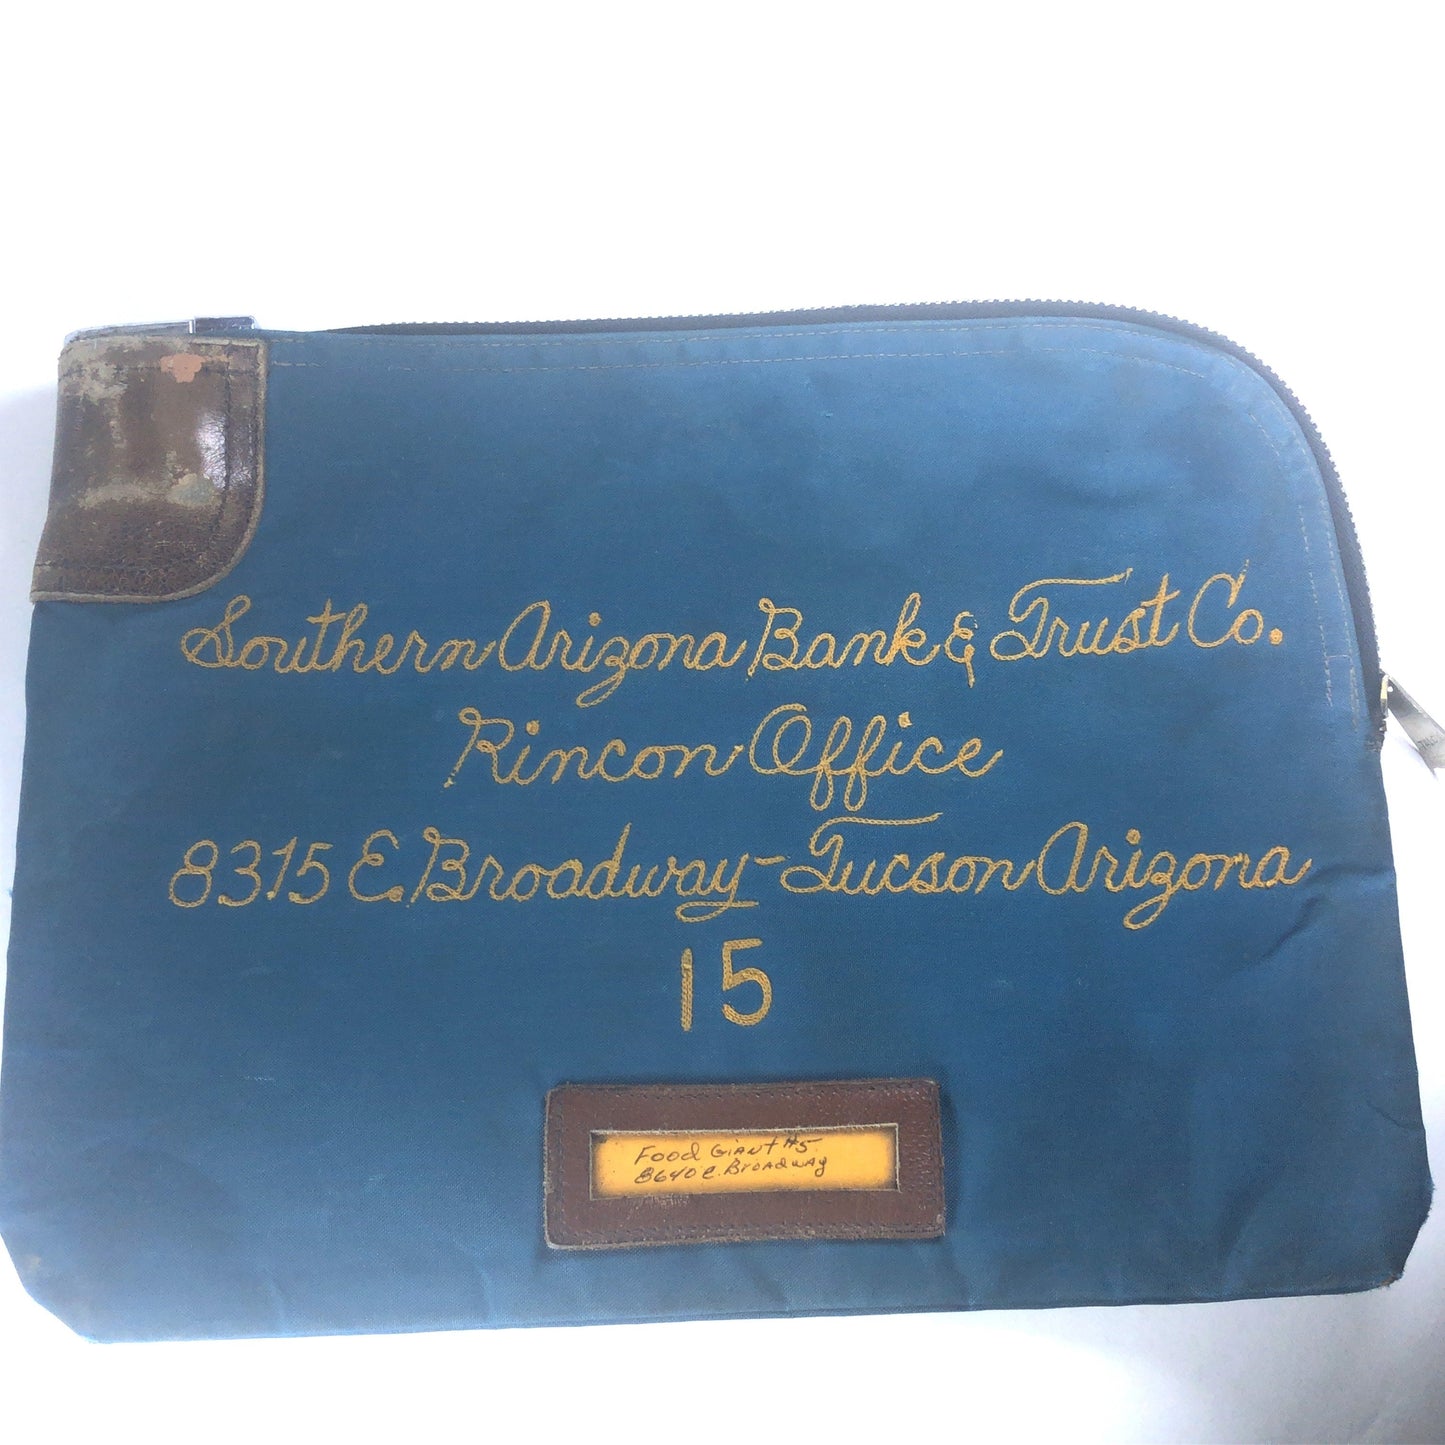 Southern Arizona Bank And Trust Company Money Bag With Key Rincon Office